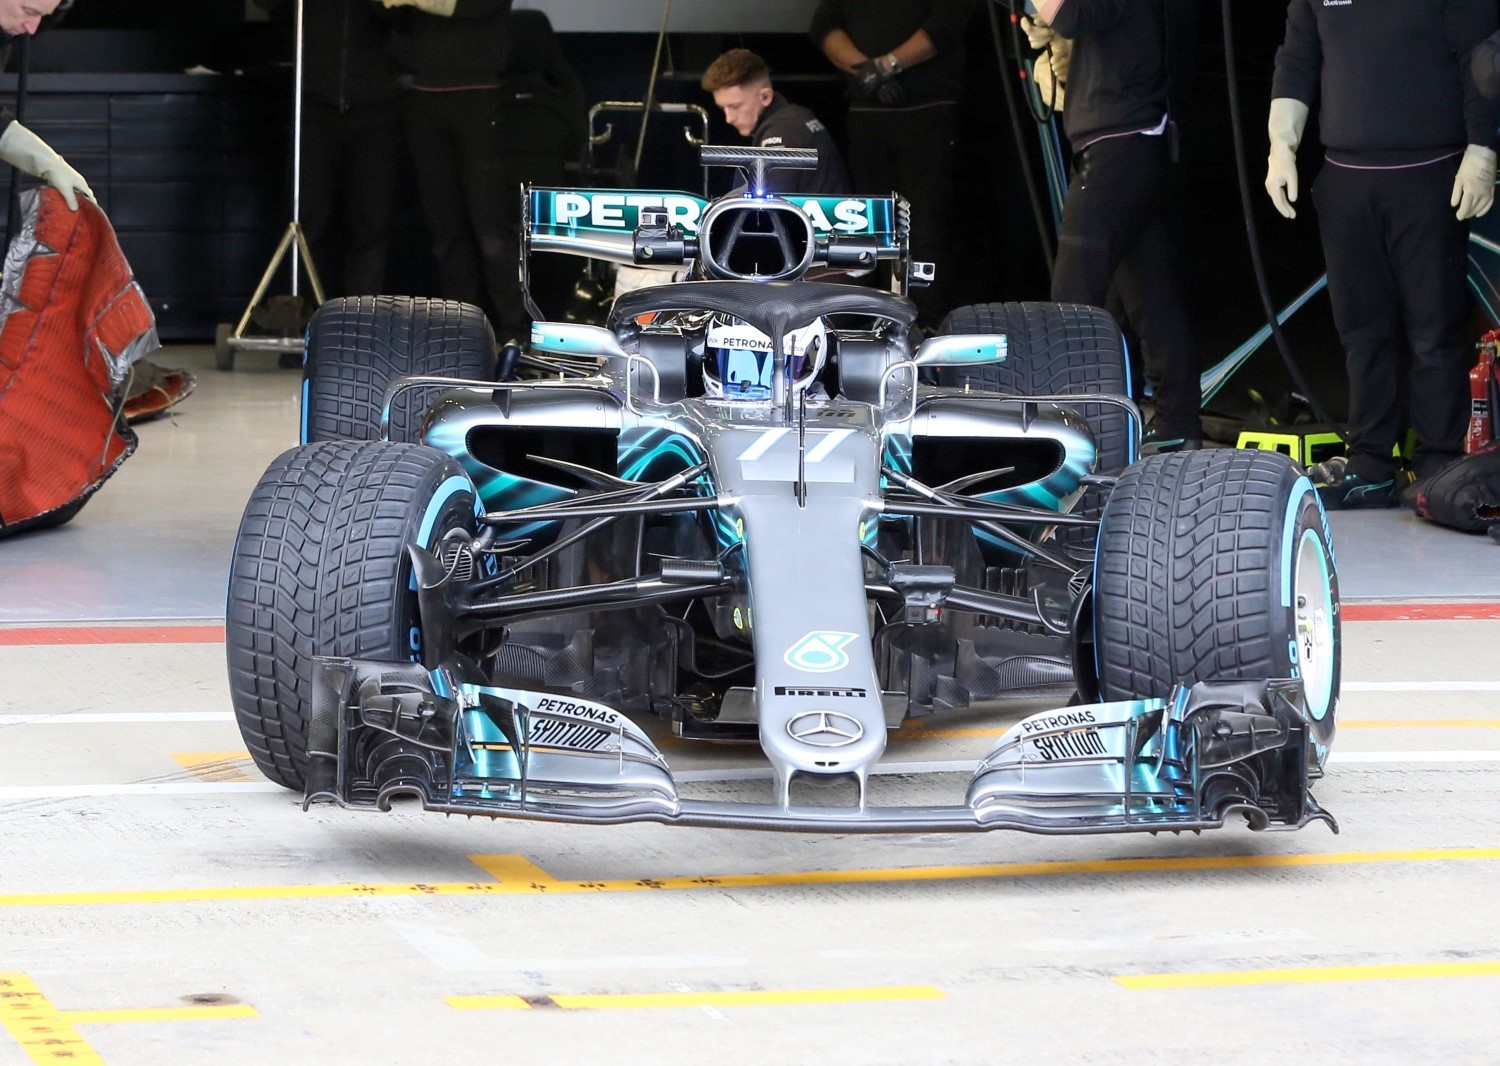 Not worried? Vettel should lose sleep at nights over this car.